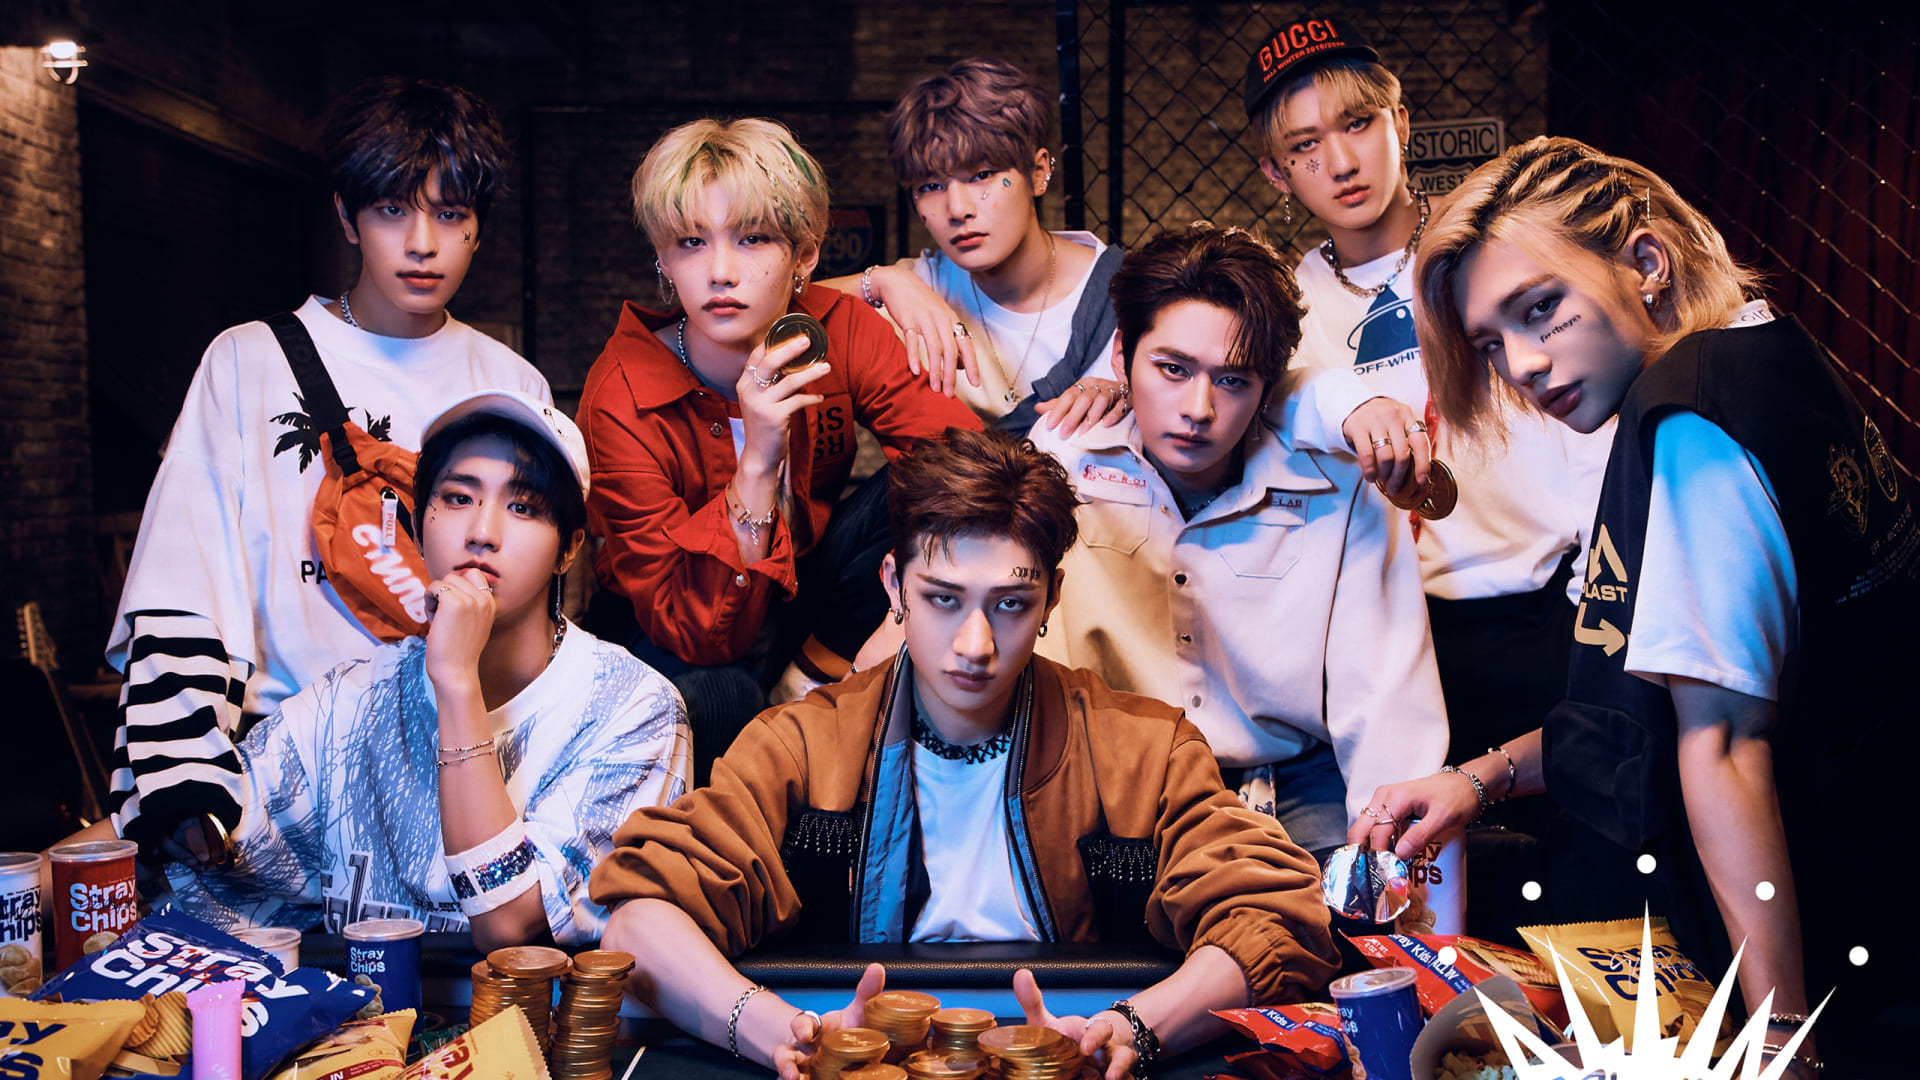 Stray Kids Wallpapers - Top 30 Best Stray Kids Wallpapers Download